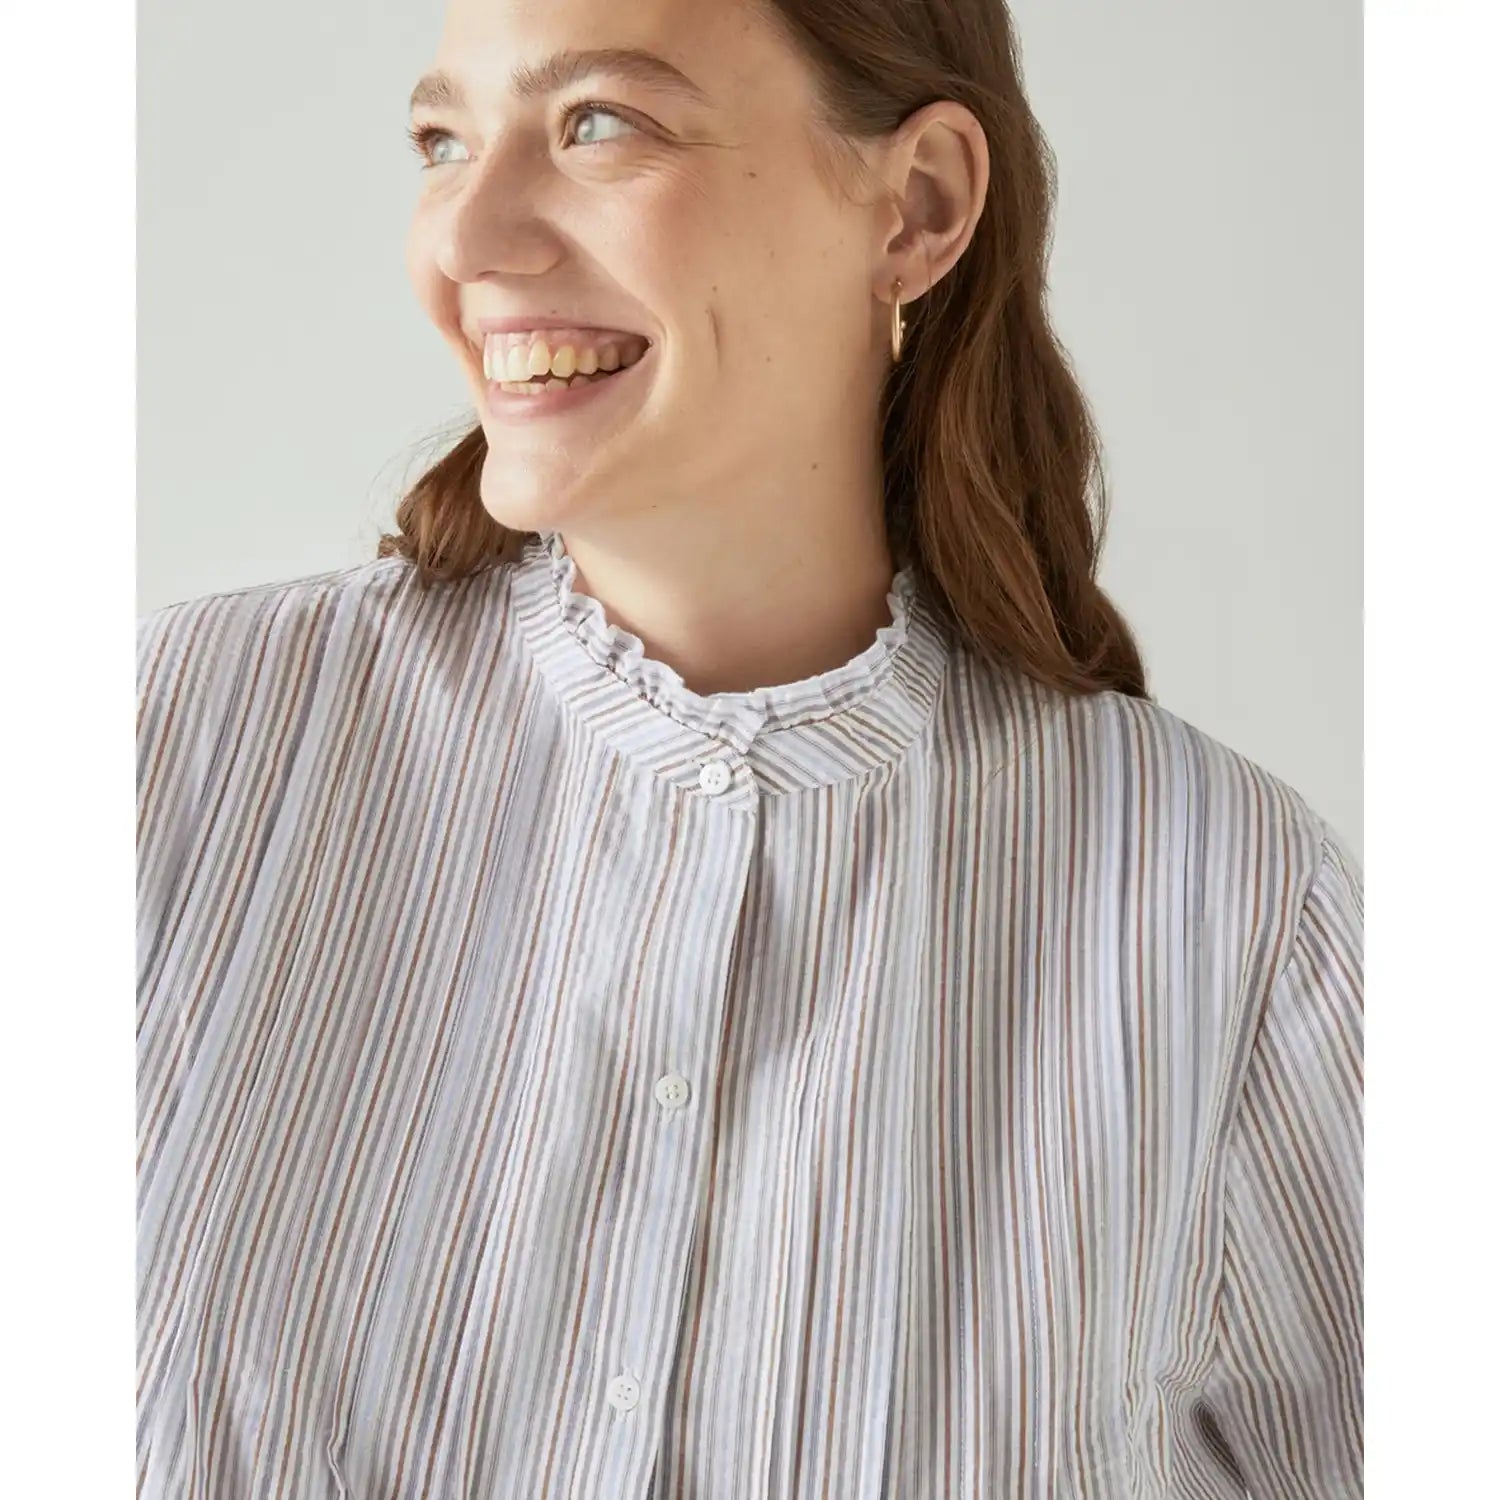 Couchel Striped Blouse With Ruffle Neck 3 Shaws Department Stores